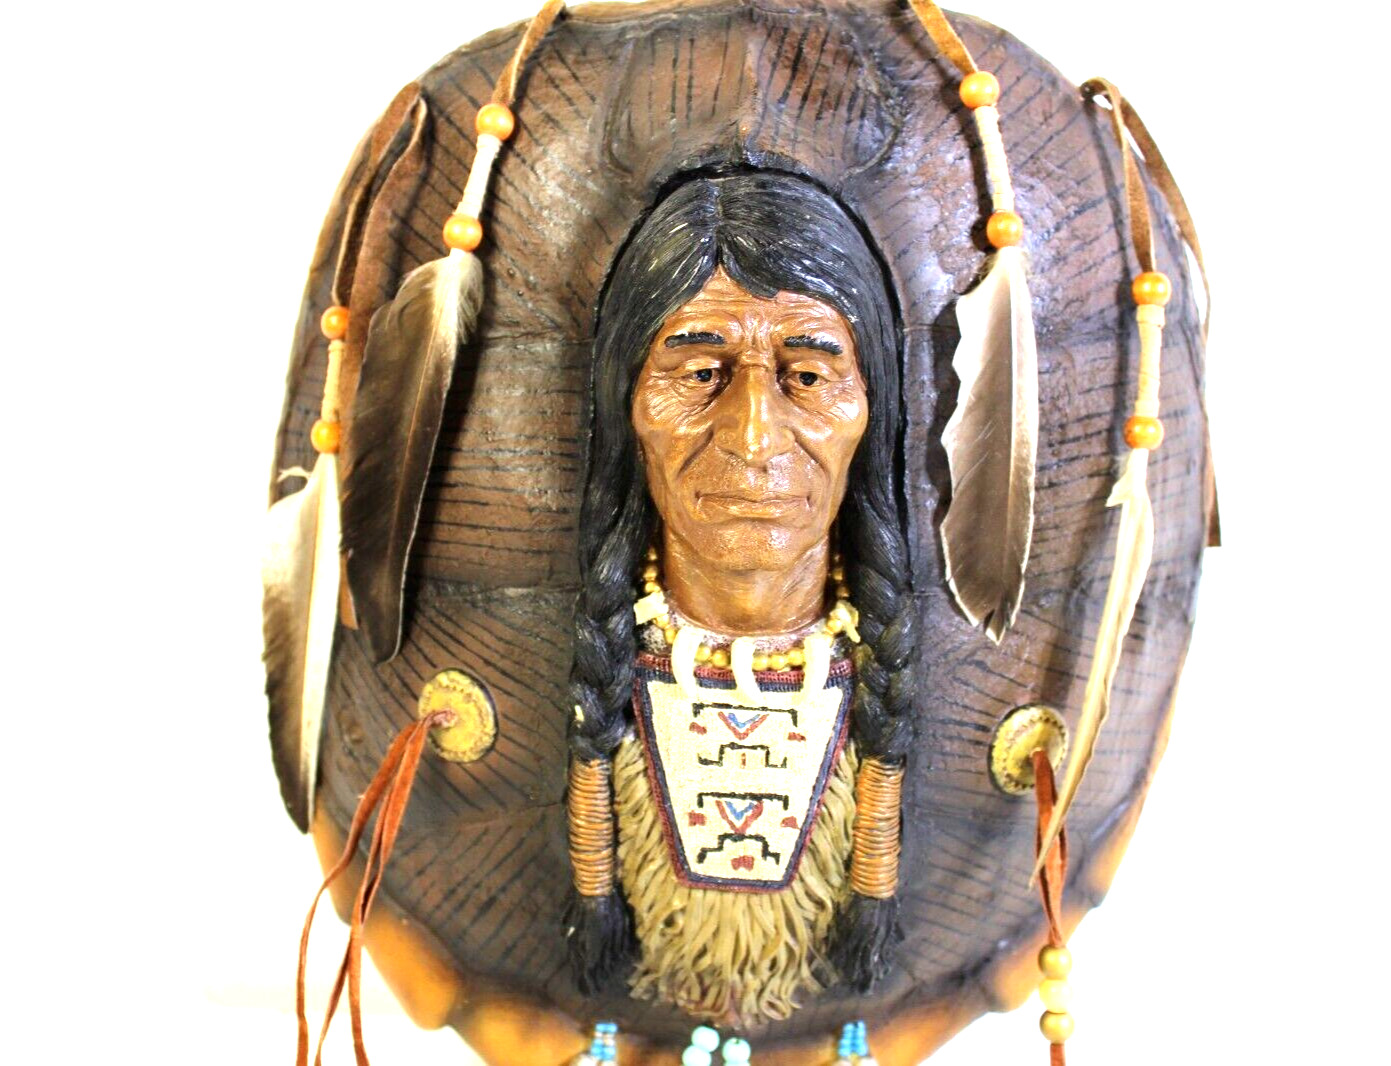 VTG Native American Resin Plastic Real Feathers and Leather Wall Hanging Art